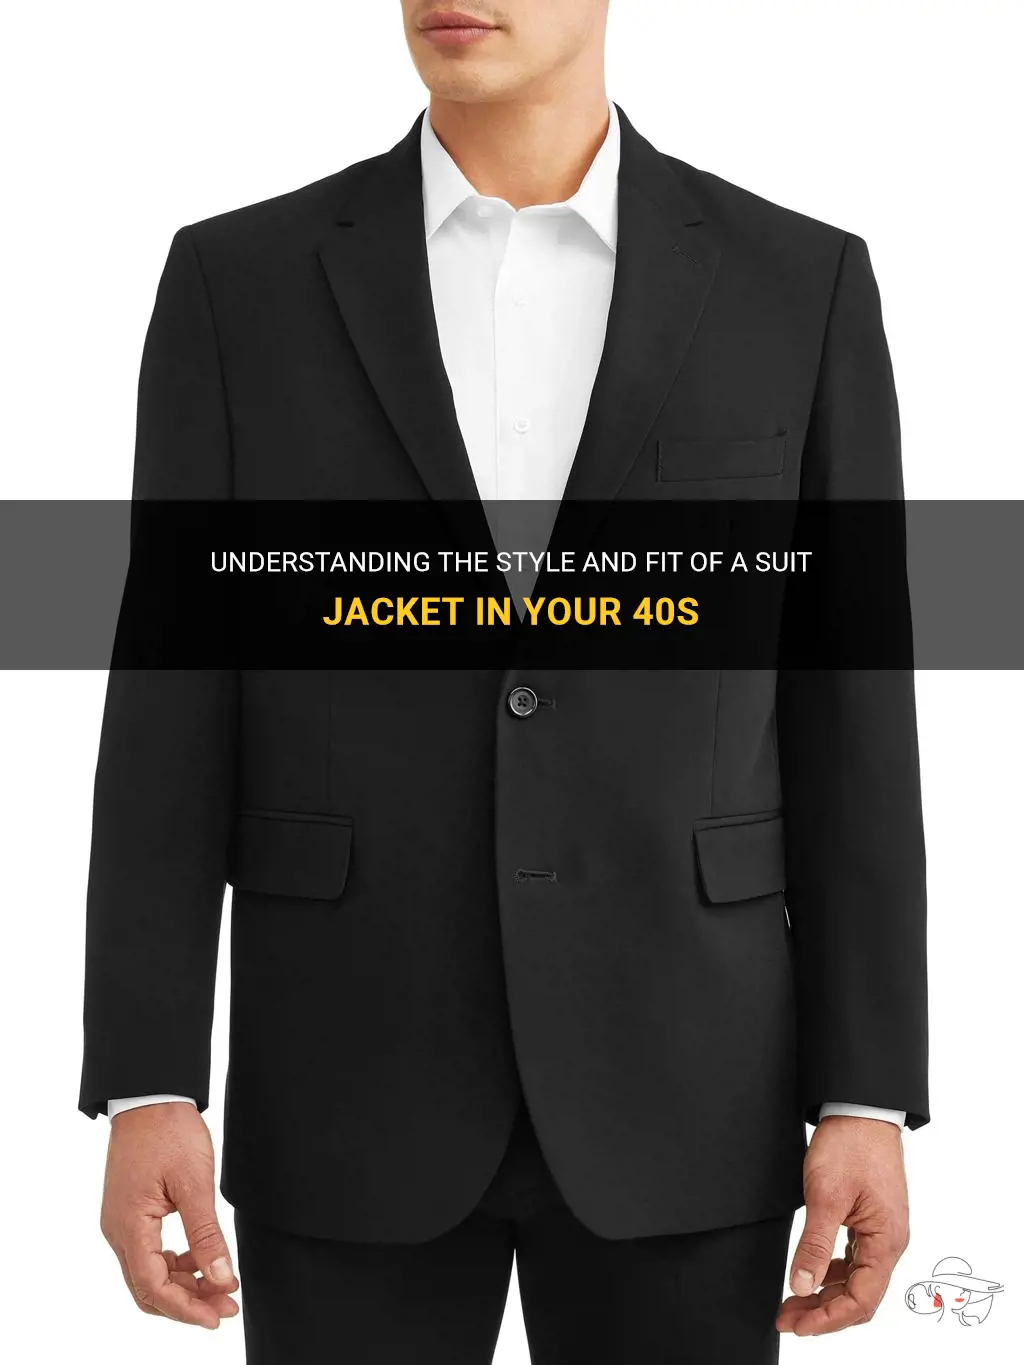 what is 40s for suit jacket